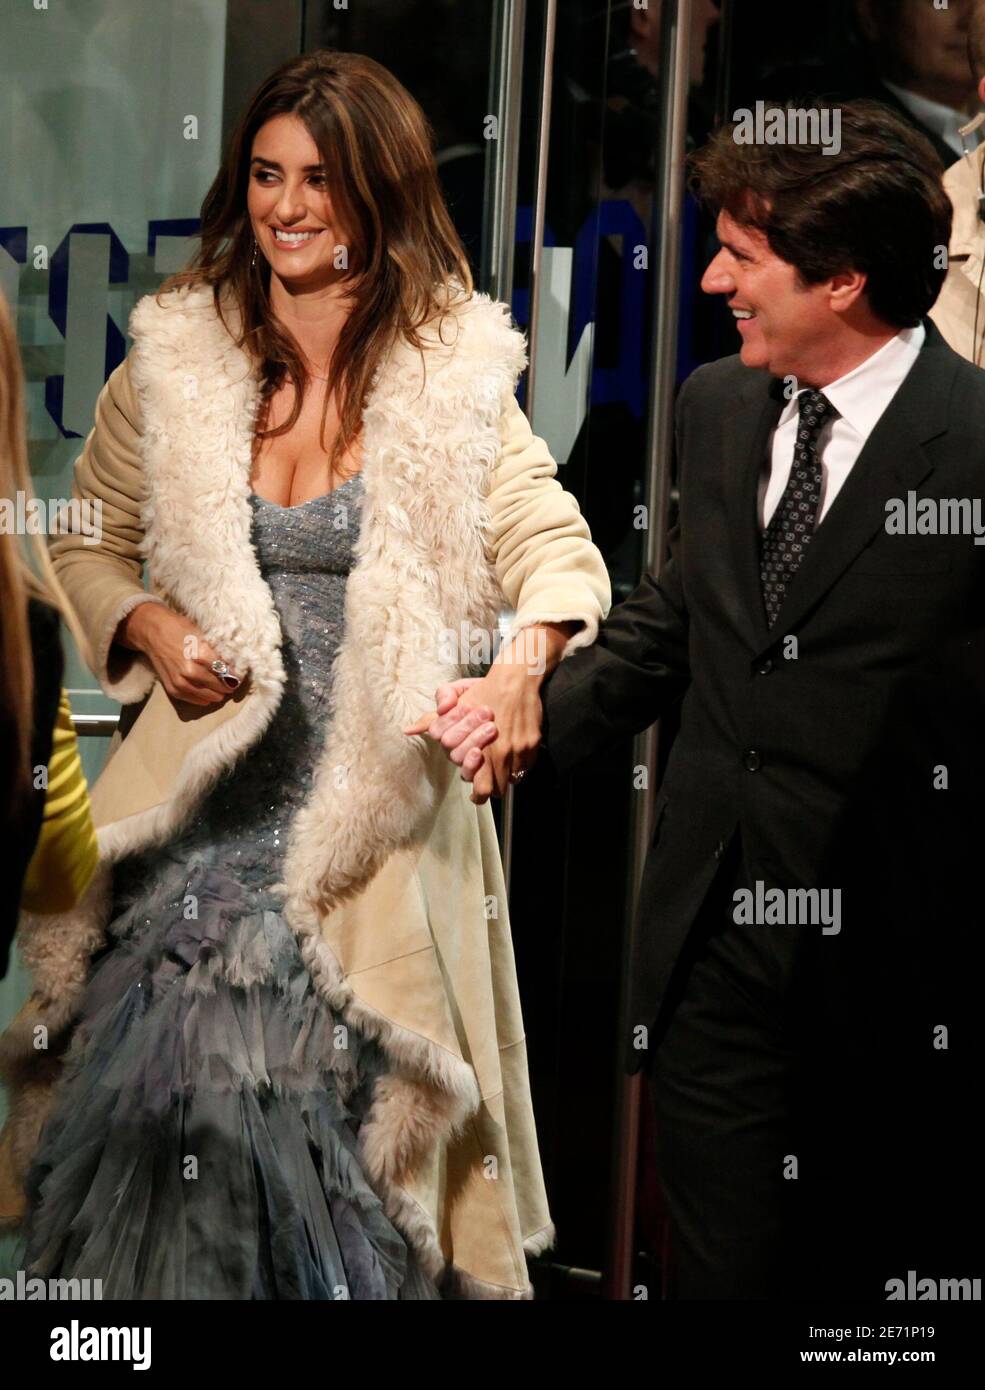 Spanish actress Penelope Cruz, wearing a Ralph Lauren Spring 2010  Collection gown and coat, smiles with film director Rob Marshall as they  arrive for the world premiere of their movie "Nine" at